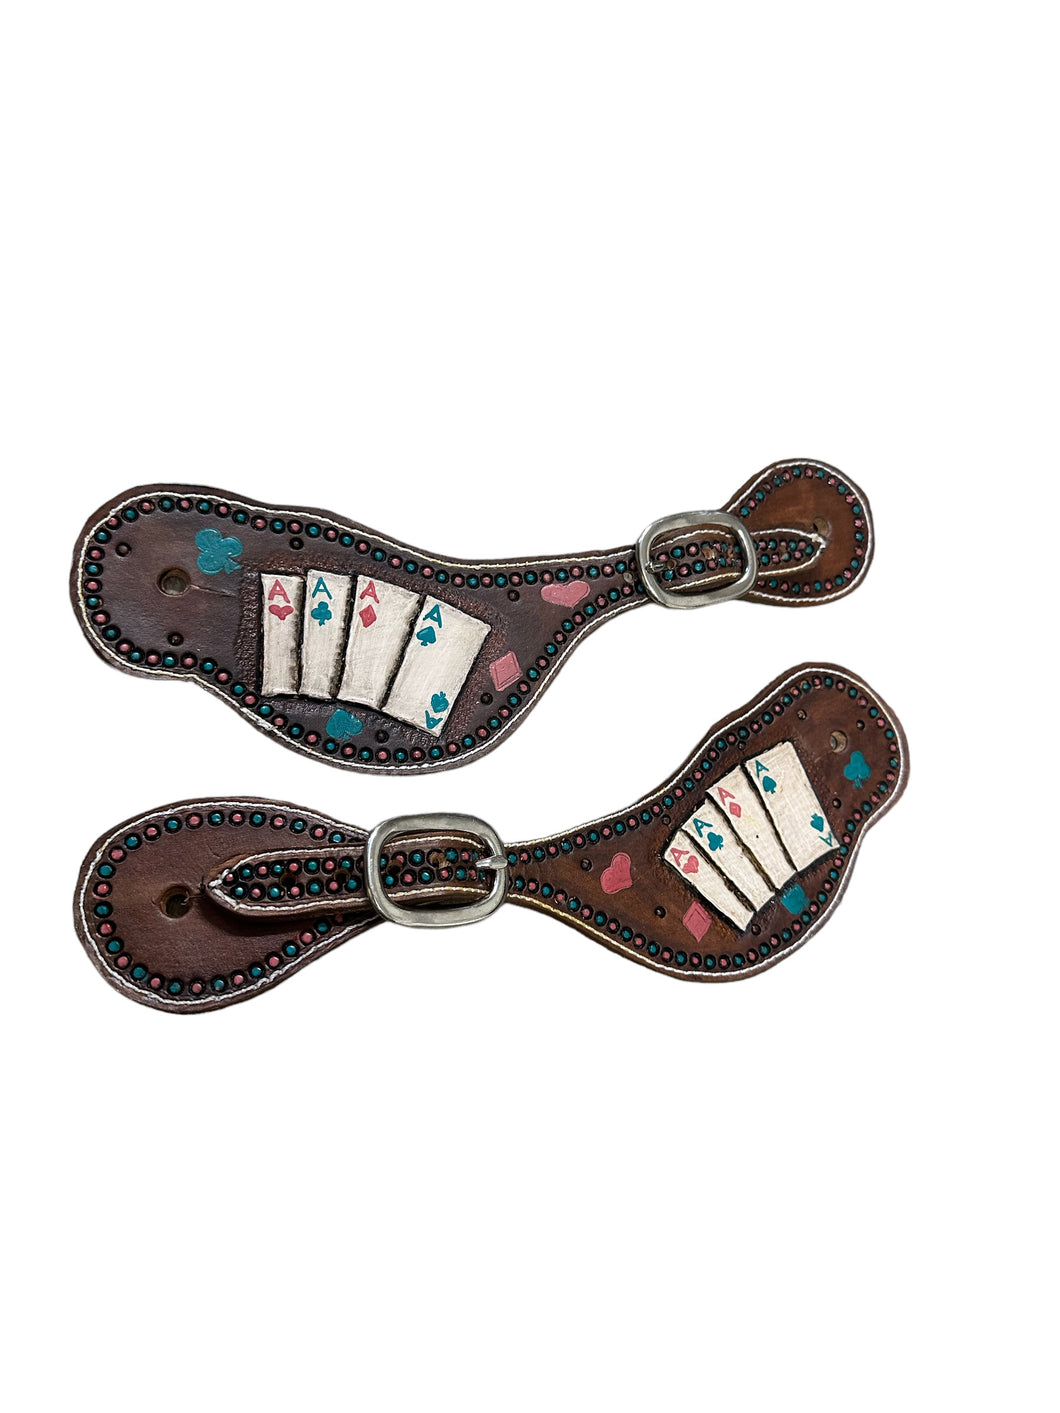 Hand tooled and painted deck of cards spur straps